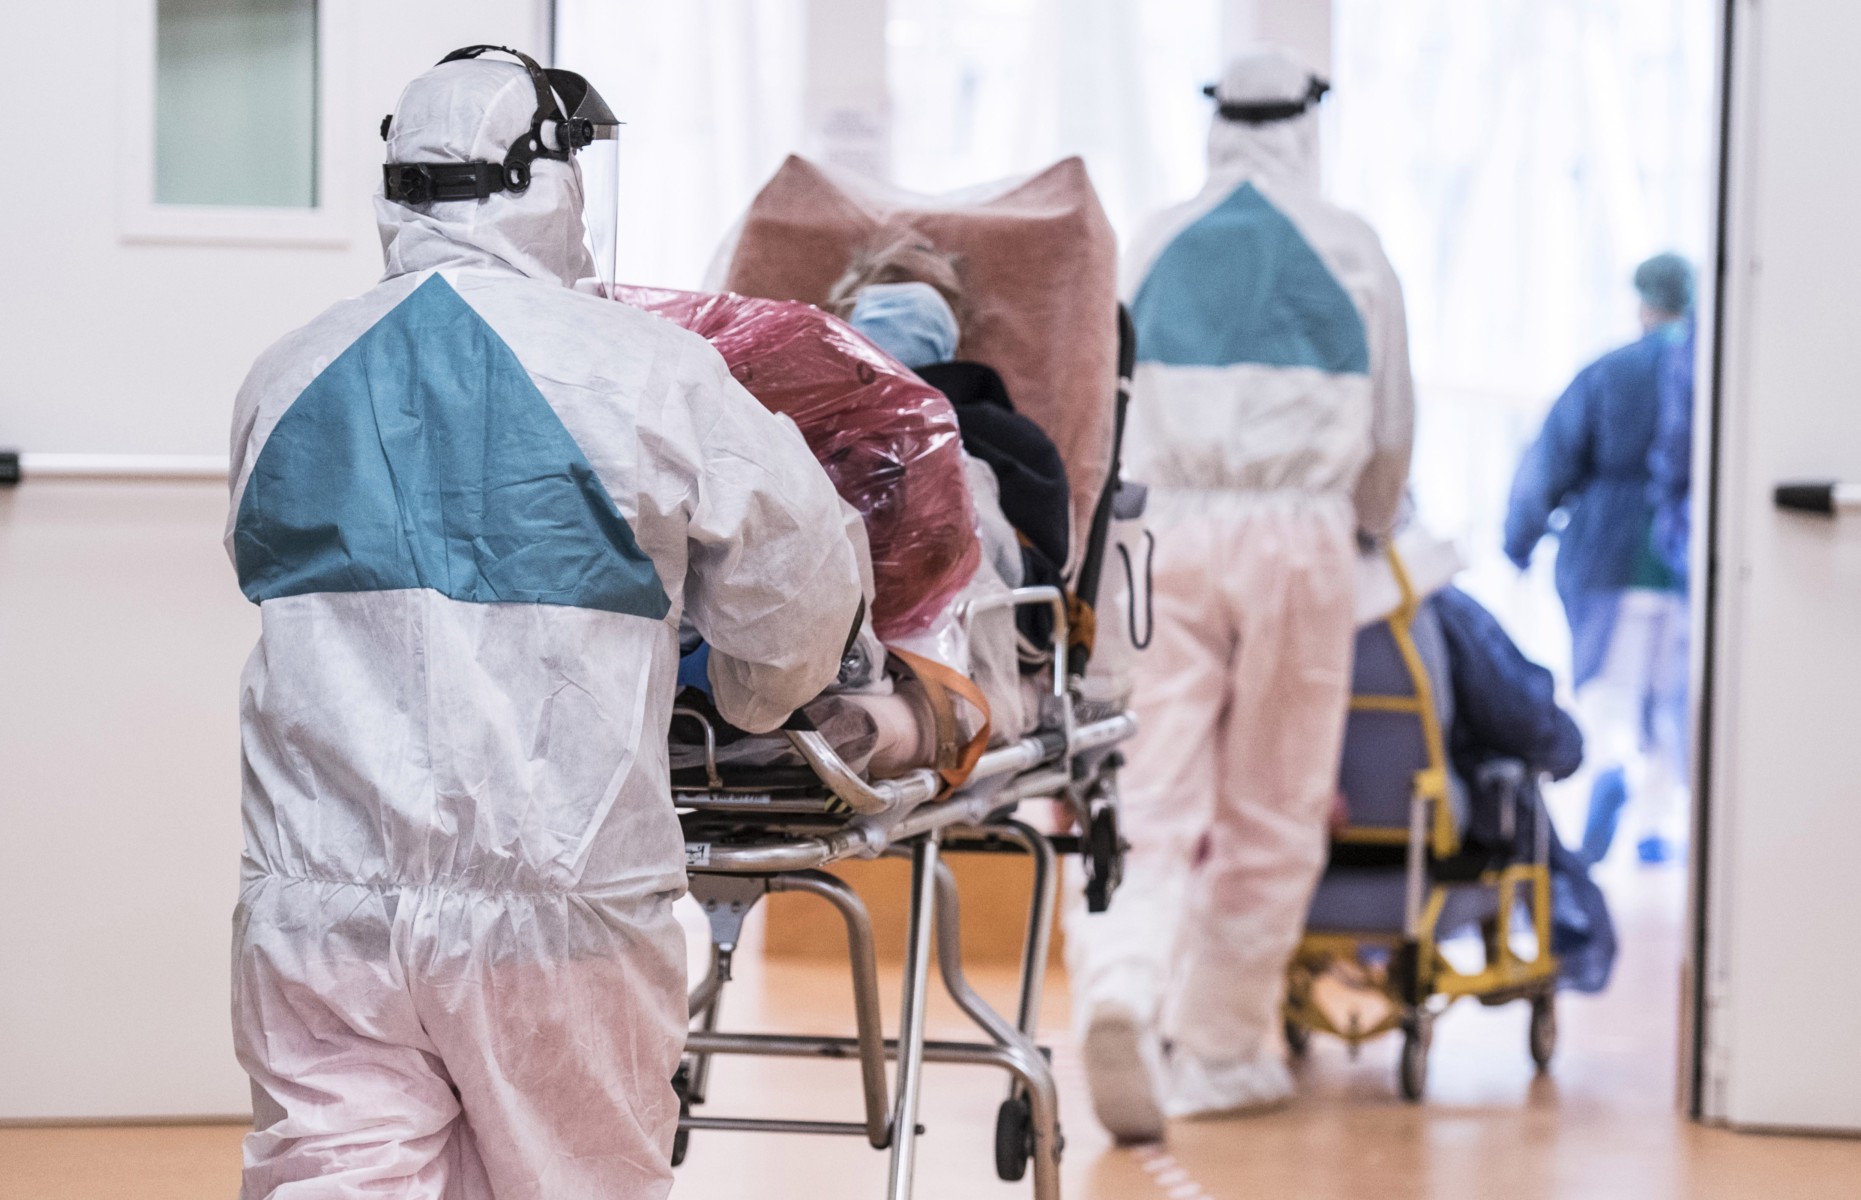 Personal healthcare workers with Personal Protective Equipment (PPE) transport infected Coronavirus (COVID 19) patients at the Verduno Hospital on March 31, 2020 in Turin, Italy